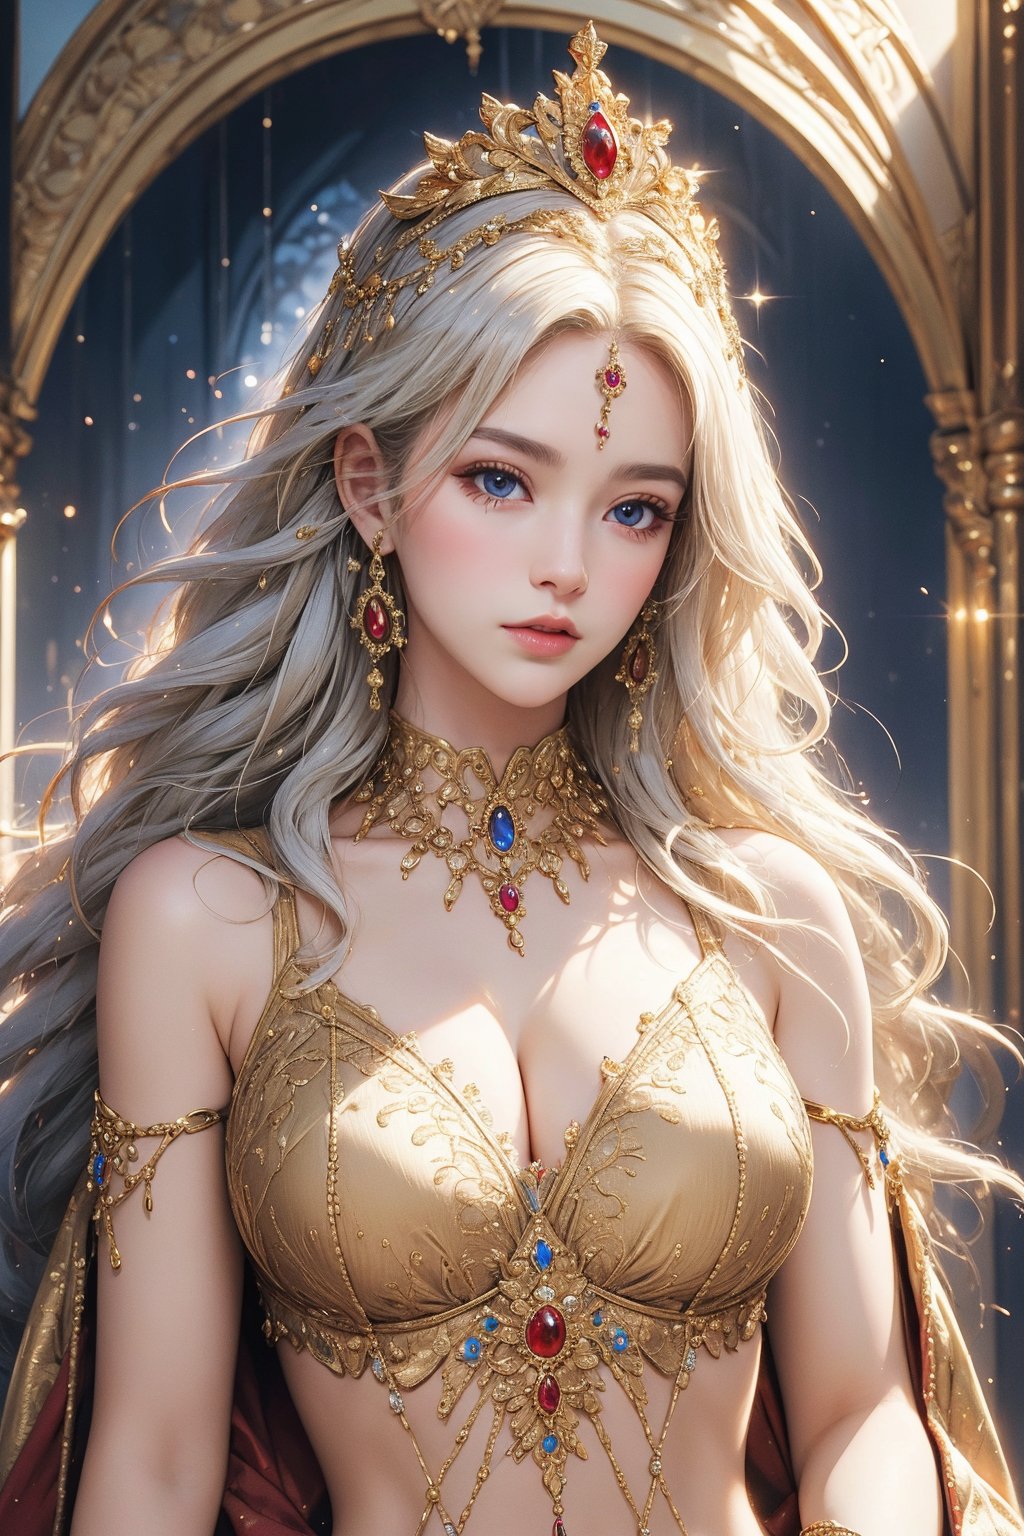 busty and sexy girl, 8k, masterpiece, ultra-realistic, best quality, high resolution, high definition,The image portrays a person with striking white hair adorned by a golden headpiece and intricate jewelry. The overall aesthetic suggests a blend of regal elegance and fantasy